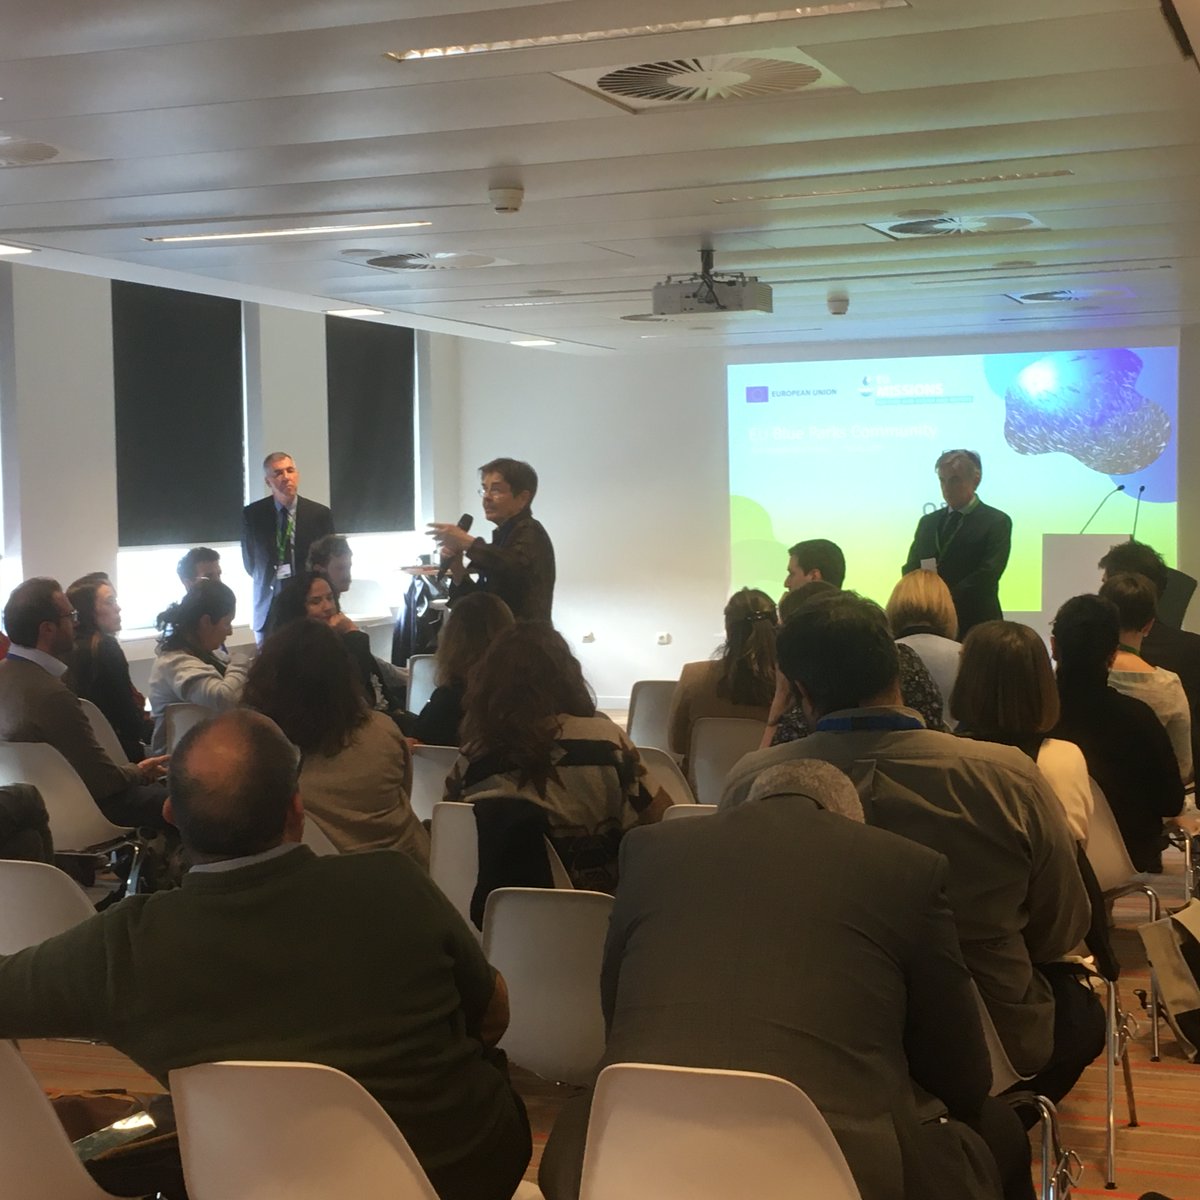 Today, the #EUBlueParks Community hosted a workshop on 'Effective management of Marine Protected Areas.' #EUOceanDays #MissionOcean. Inspiring exchanges on #marine protection and conservation!